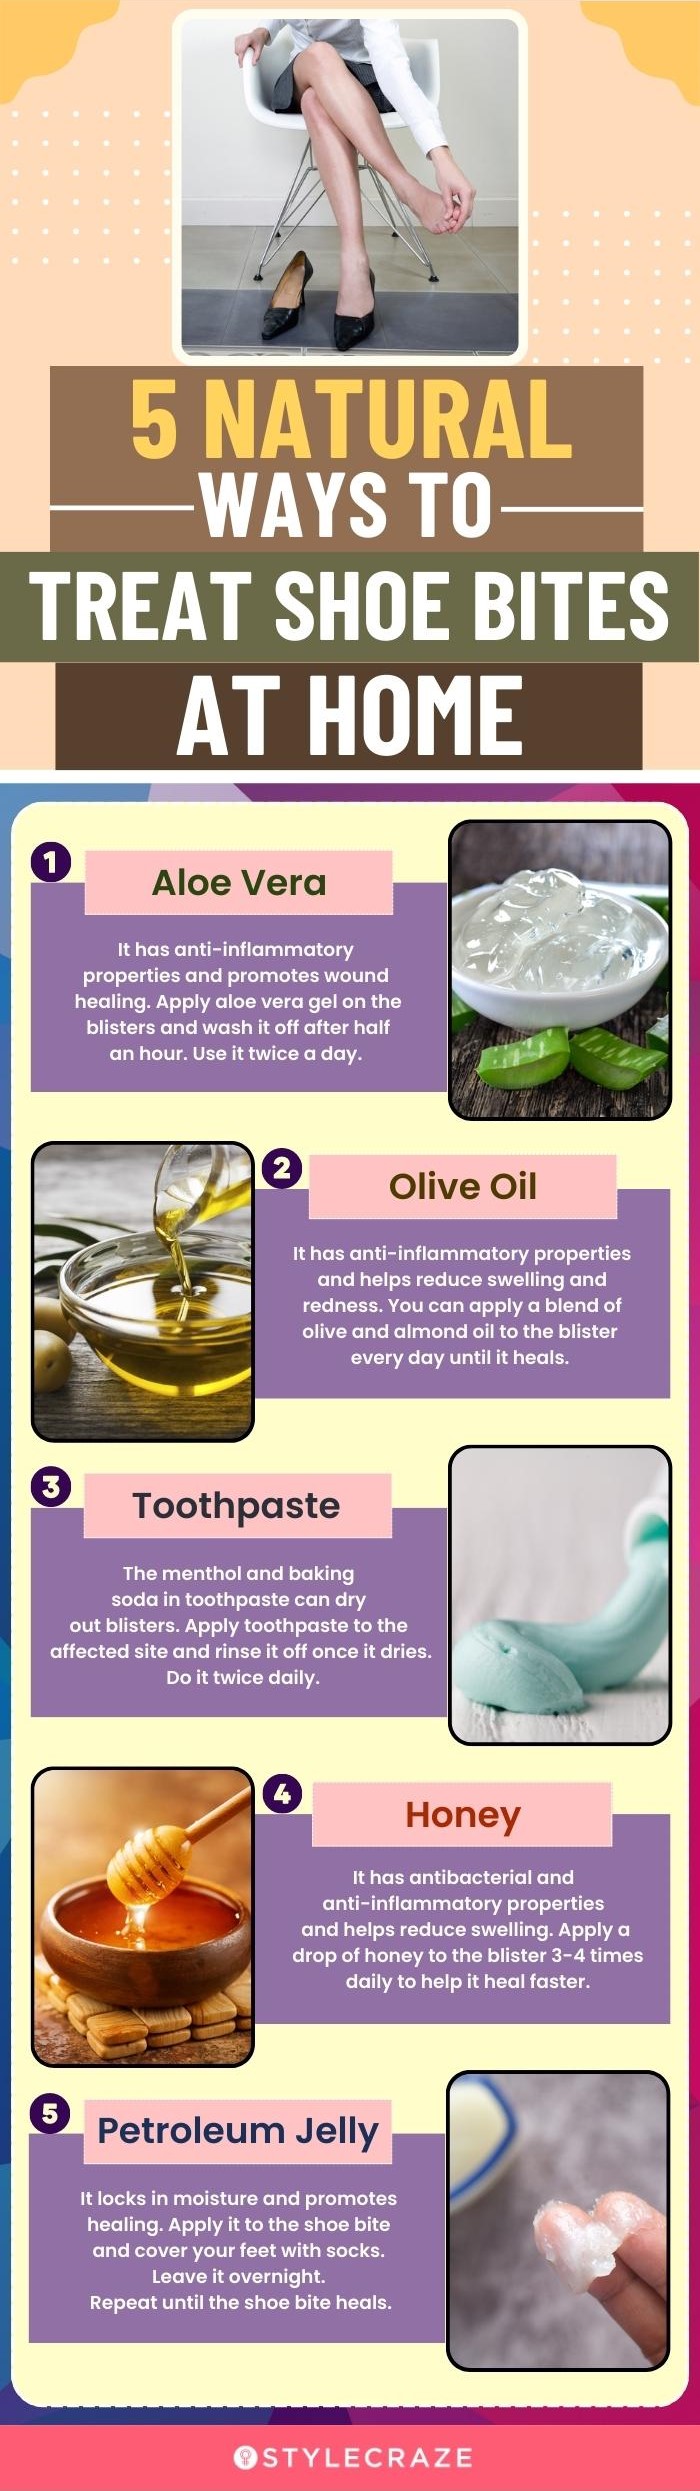 5 natural ways to treat shoe bites at home (infographic)